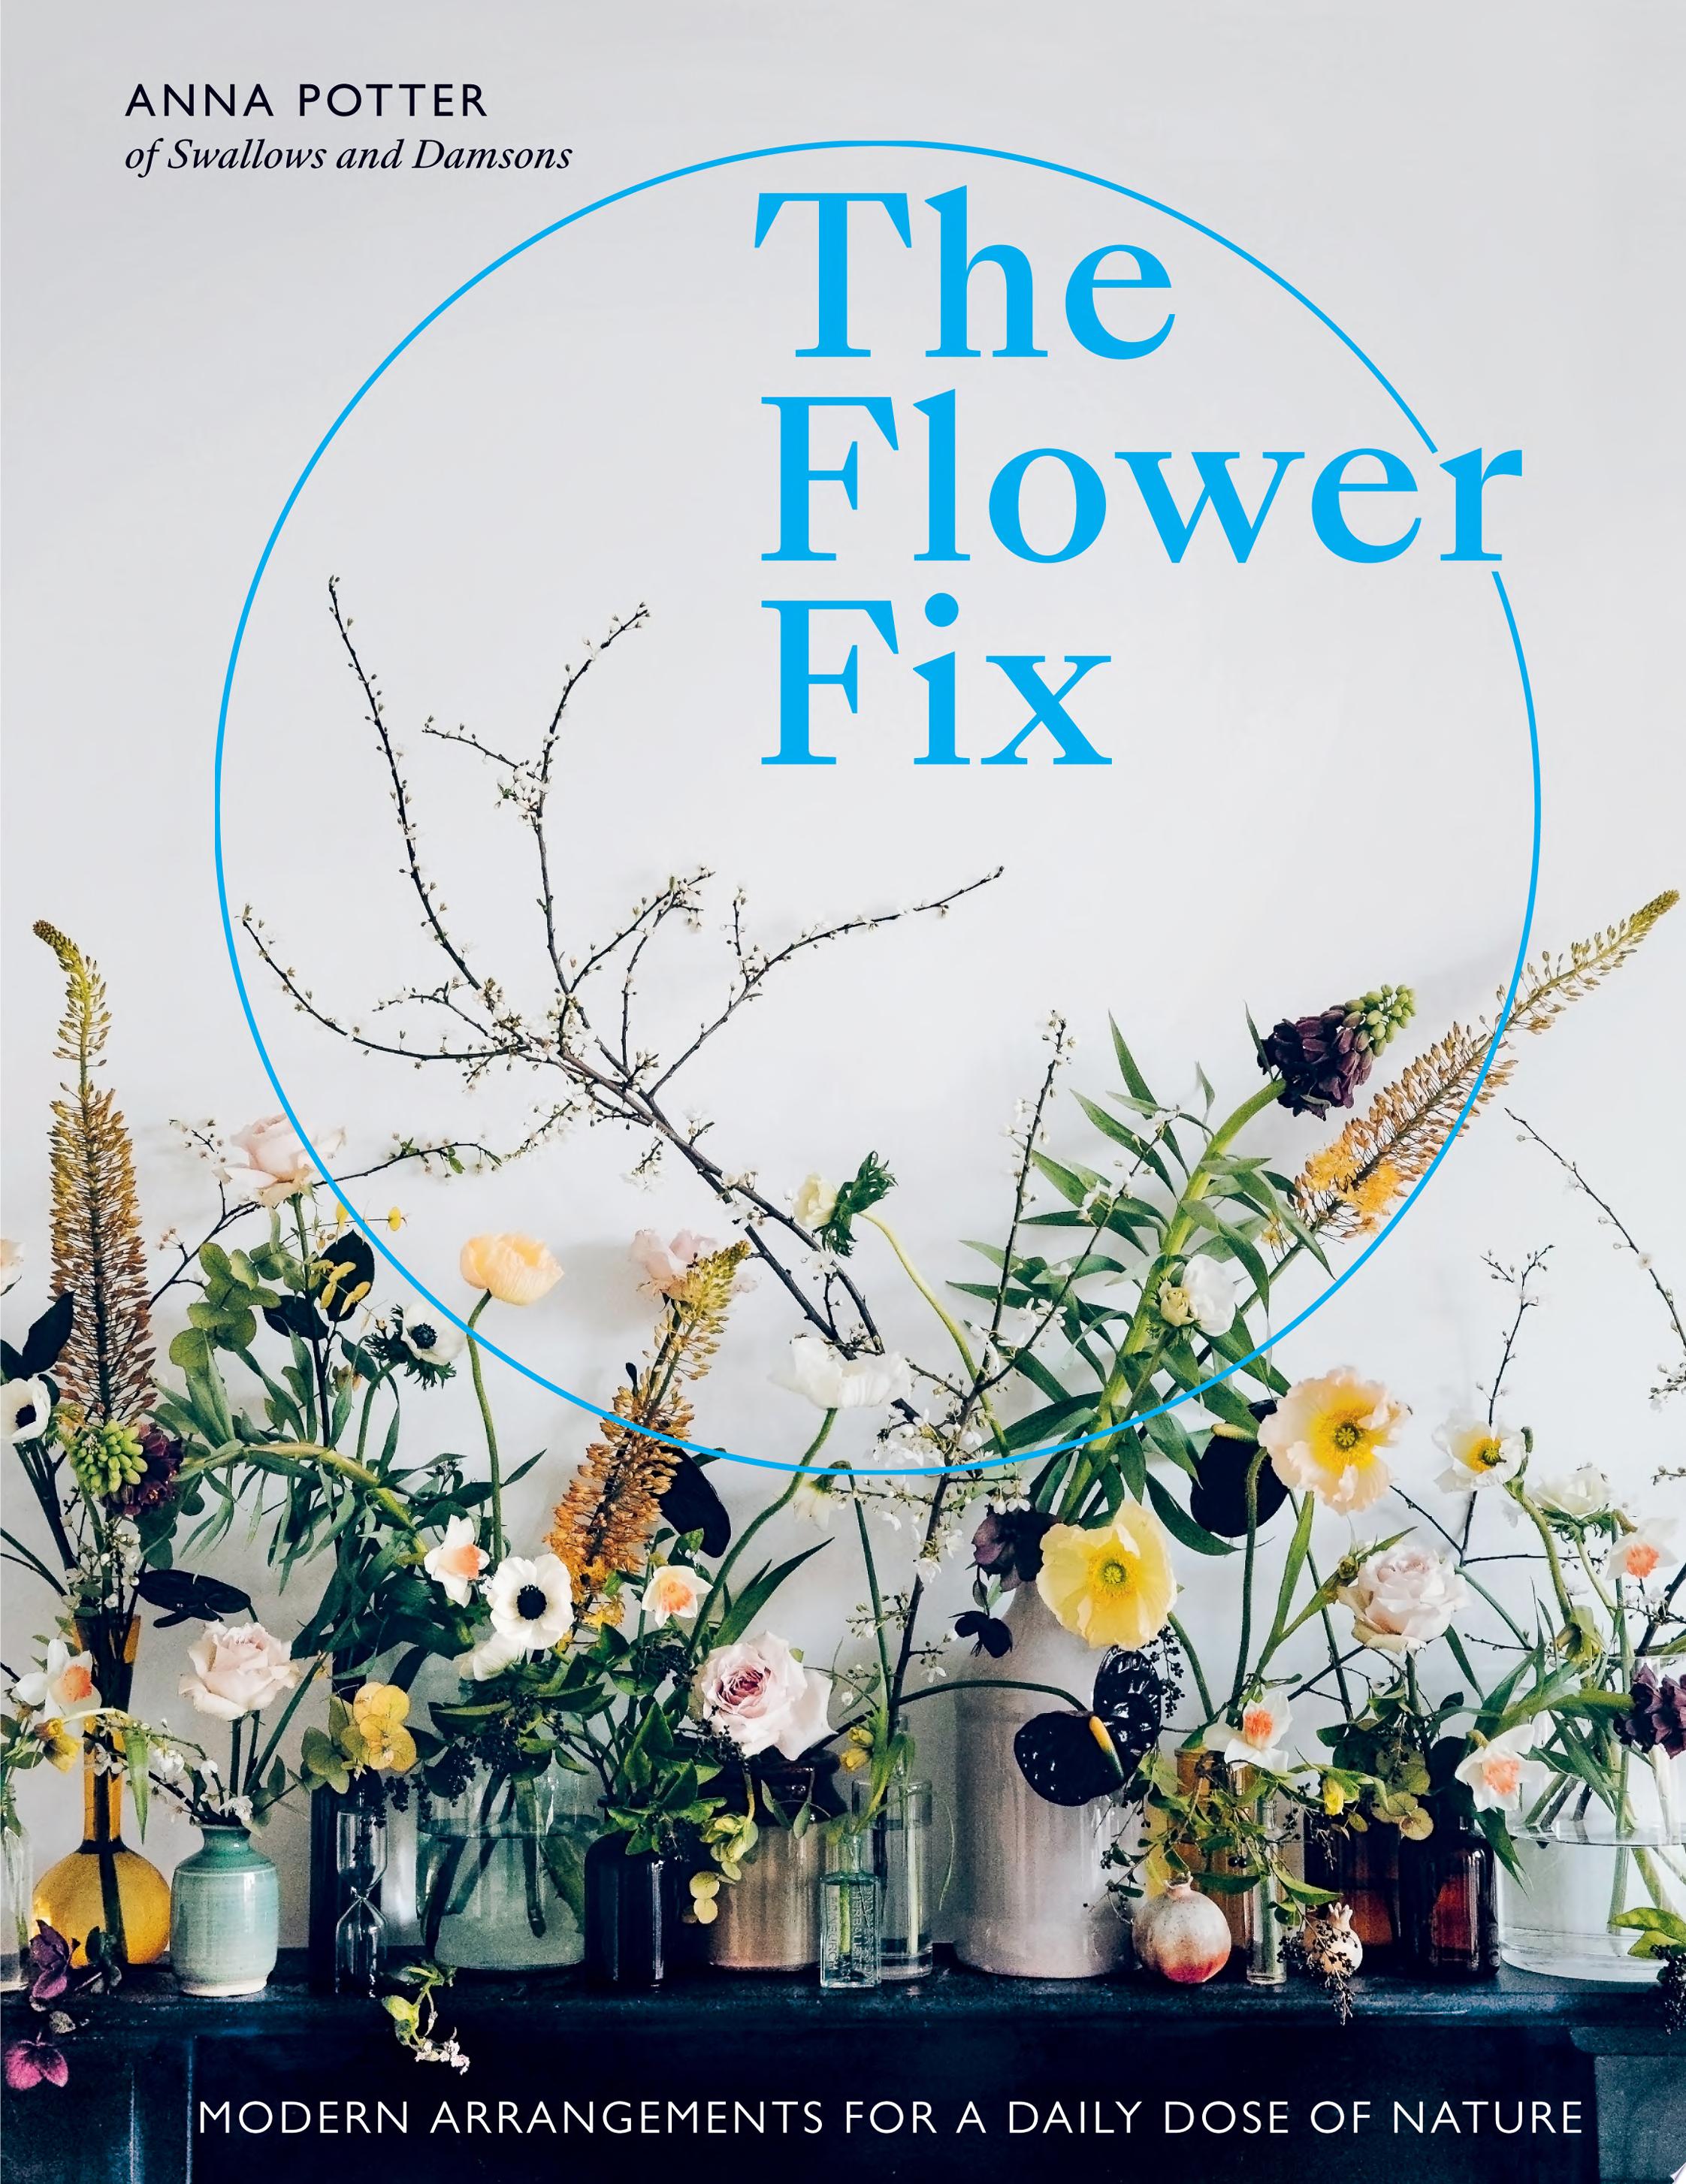 Image for "The Flower Fix"